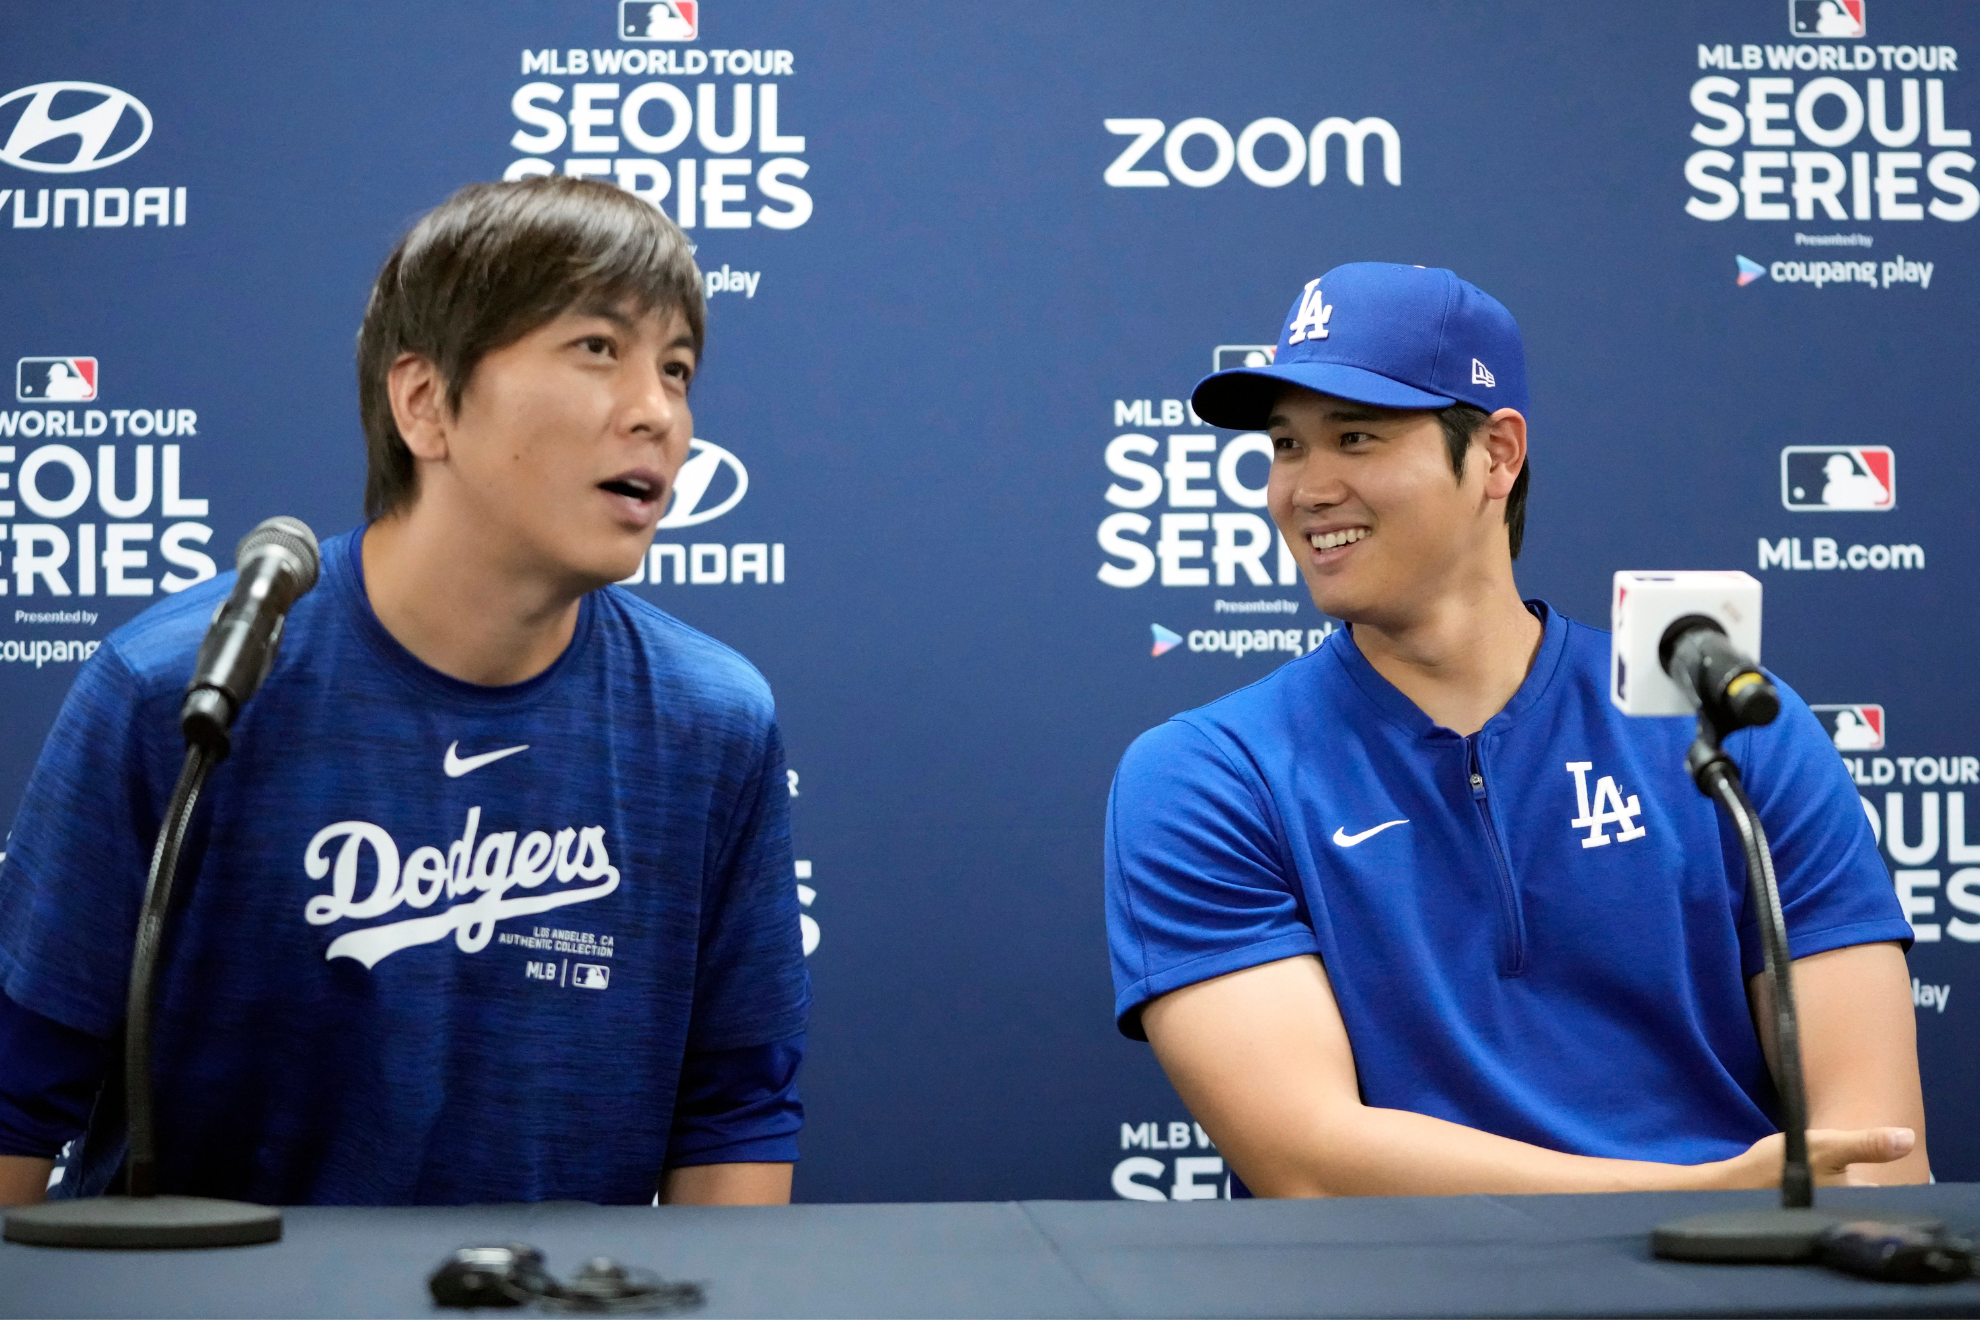 Mizuhara (left) and Ohtani (right) at a news conference, days before the formers dismissal from the Dodgers.